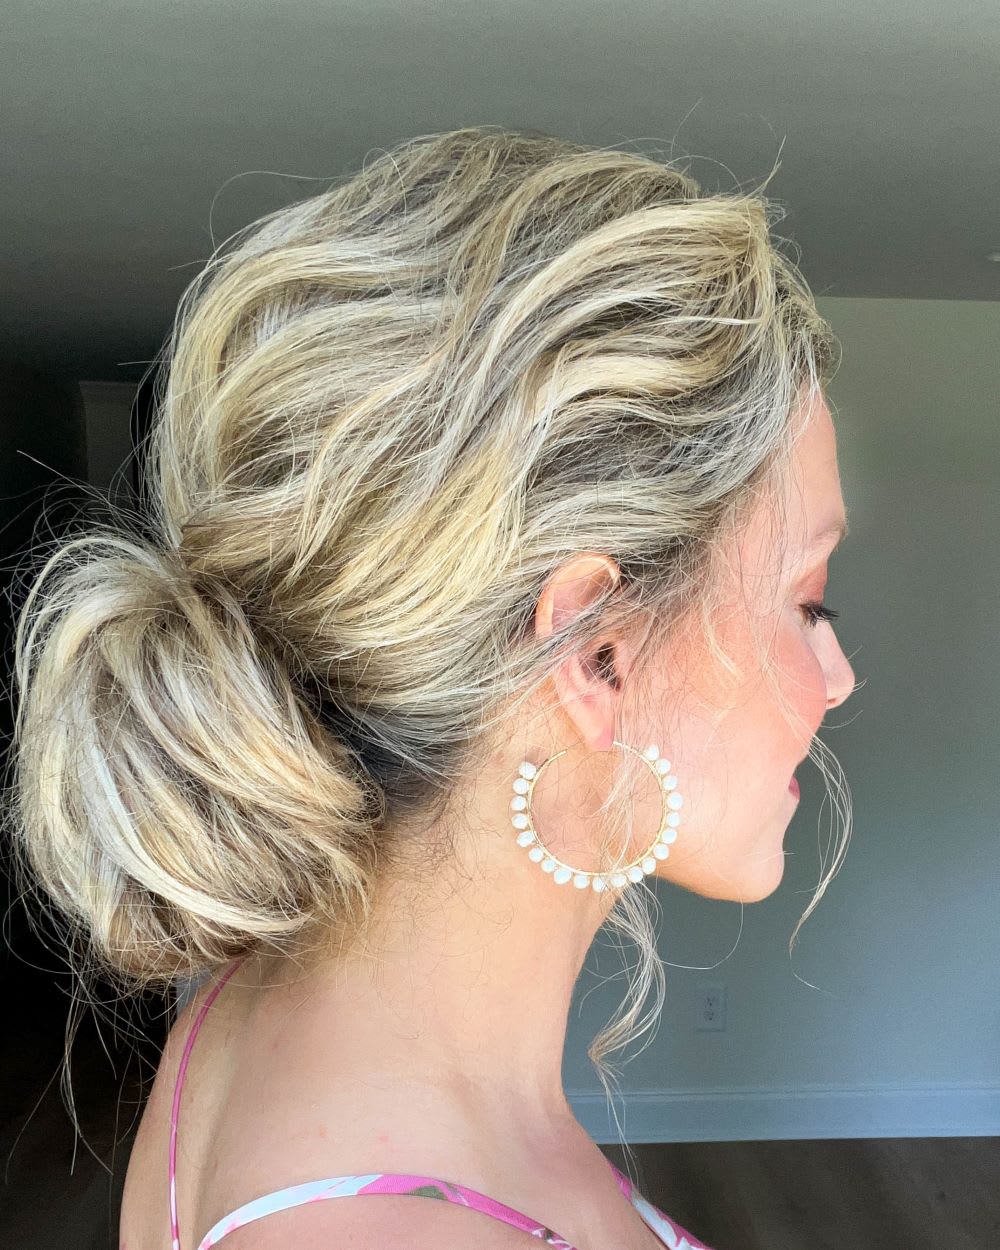 How To Do The Easiest Chignon Bun Hairstyle - Lulus.com Fashion Blog